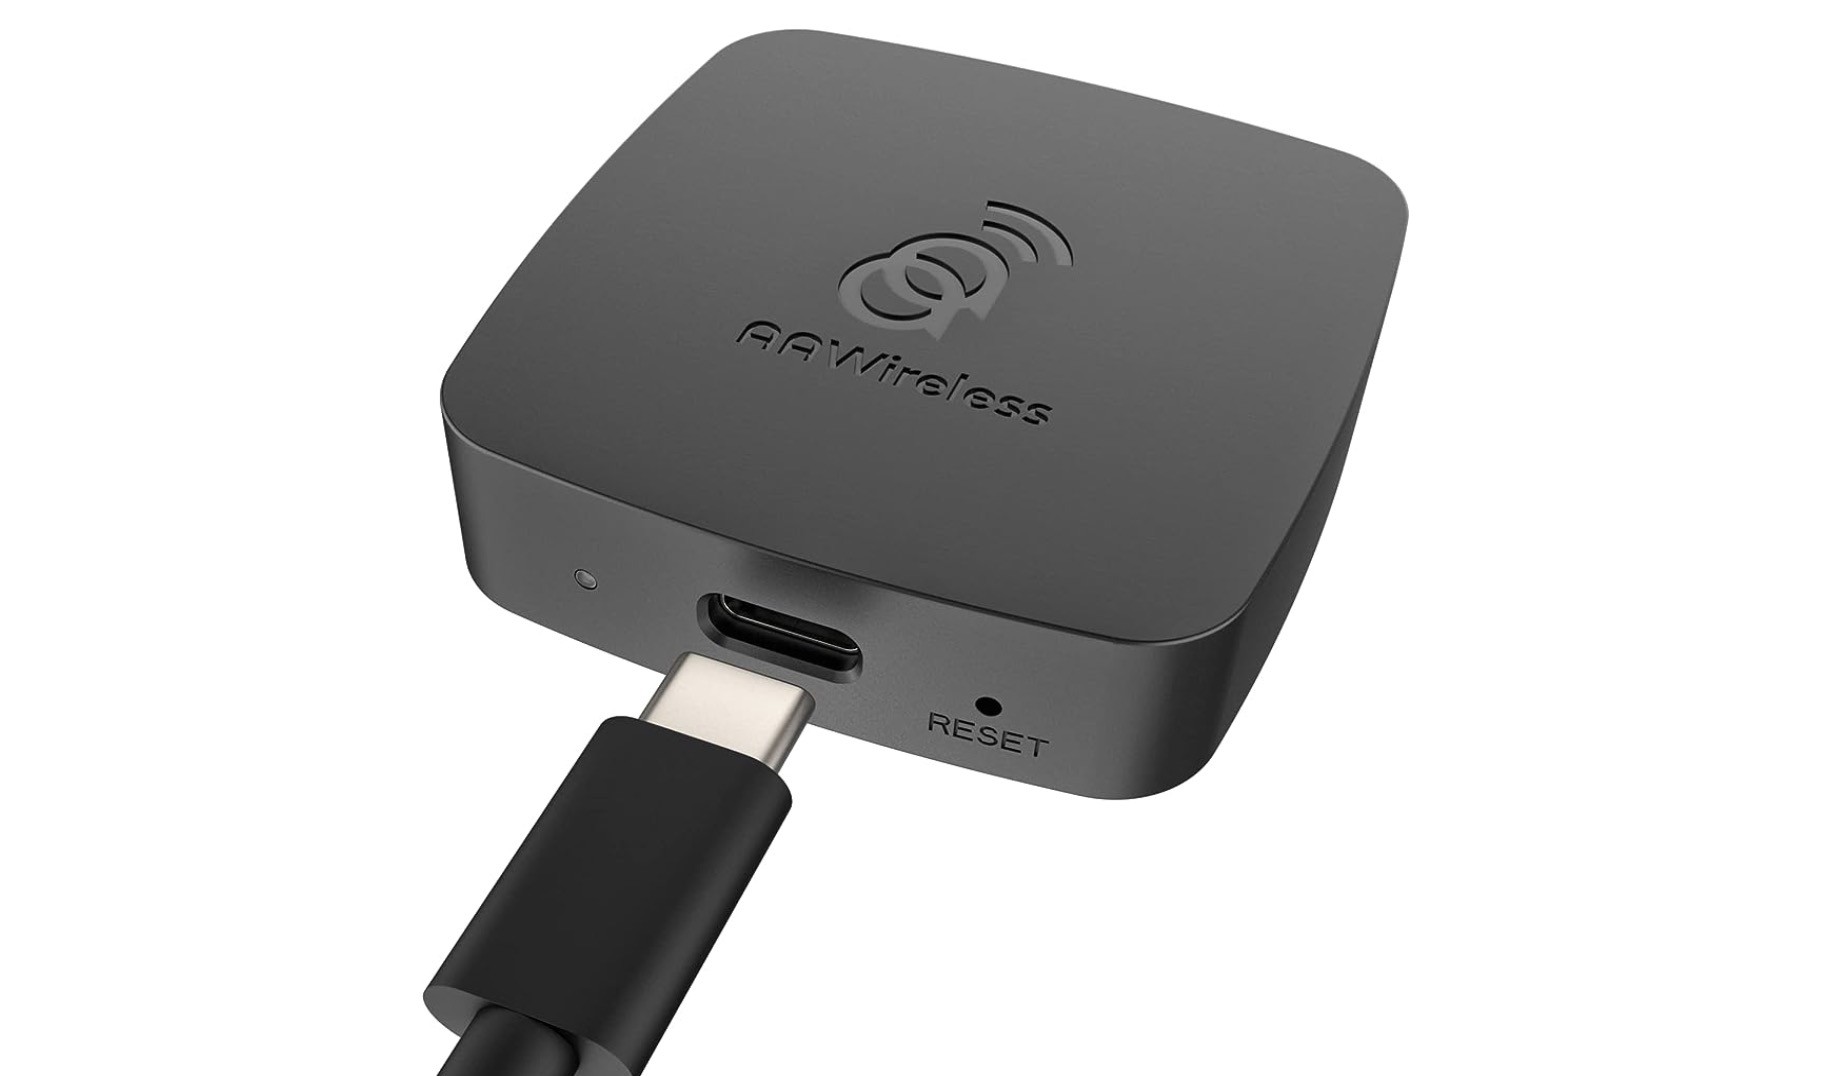 https://s1.cdn.autoevolution.com/images/news/gallery/world-s-number-1-wireless-android-auto-adapter-now-converts-wired-carplay-to-wireless_1.jpg